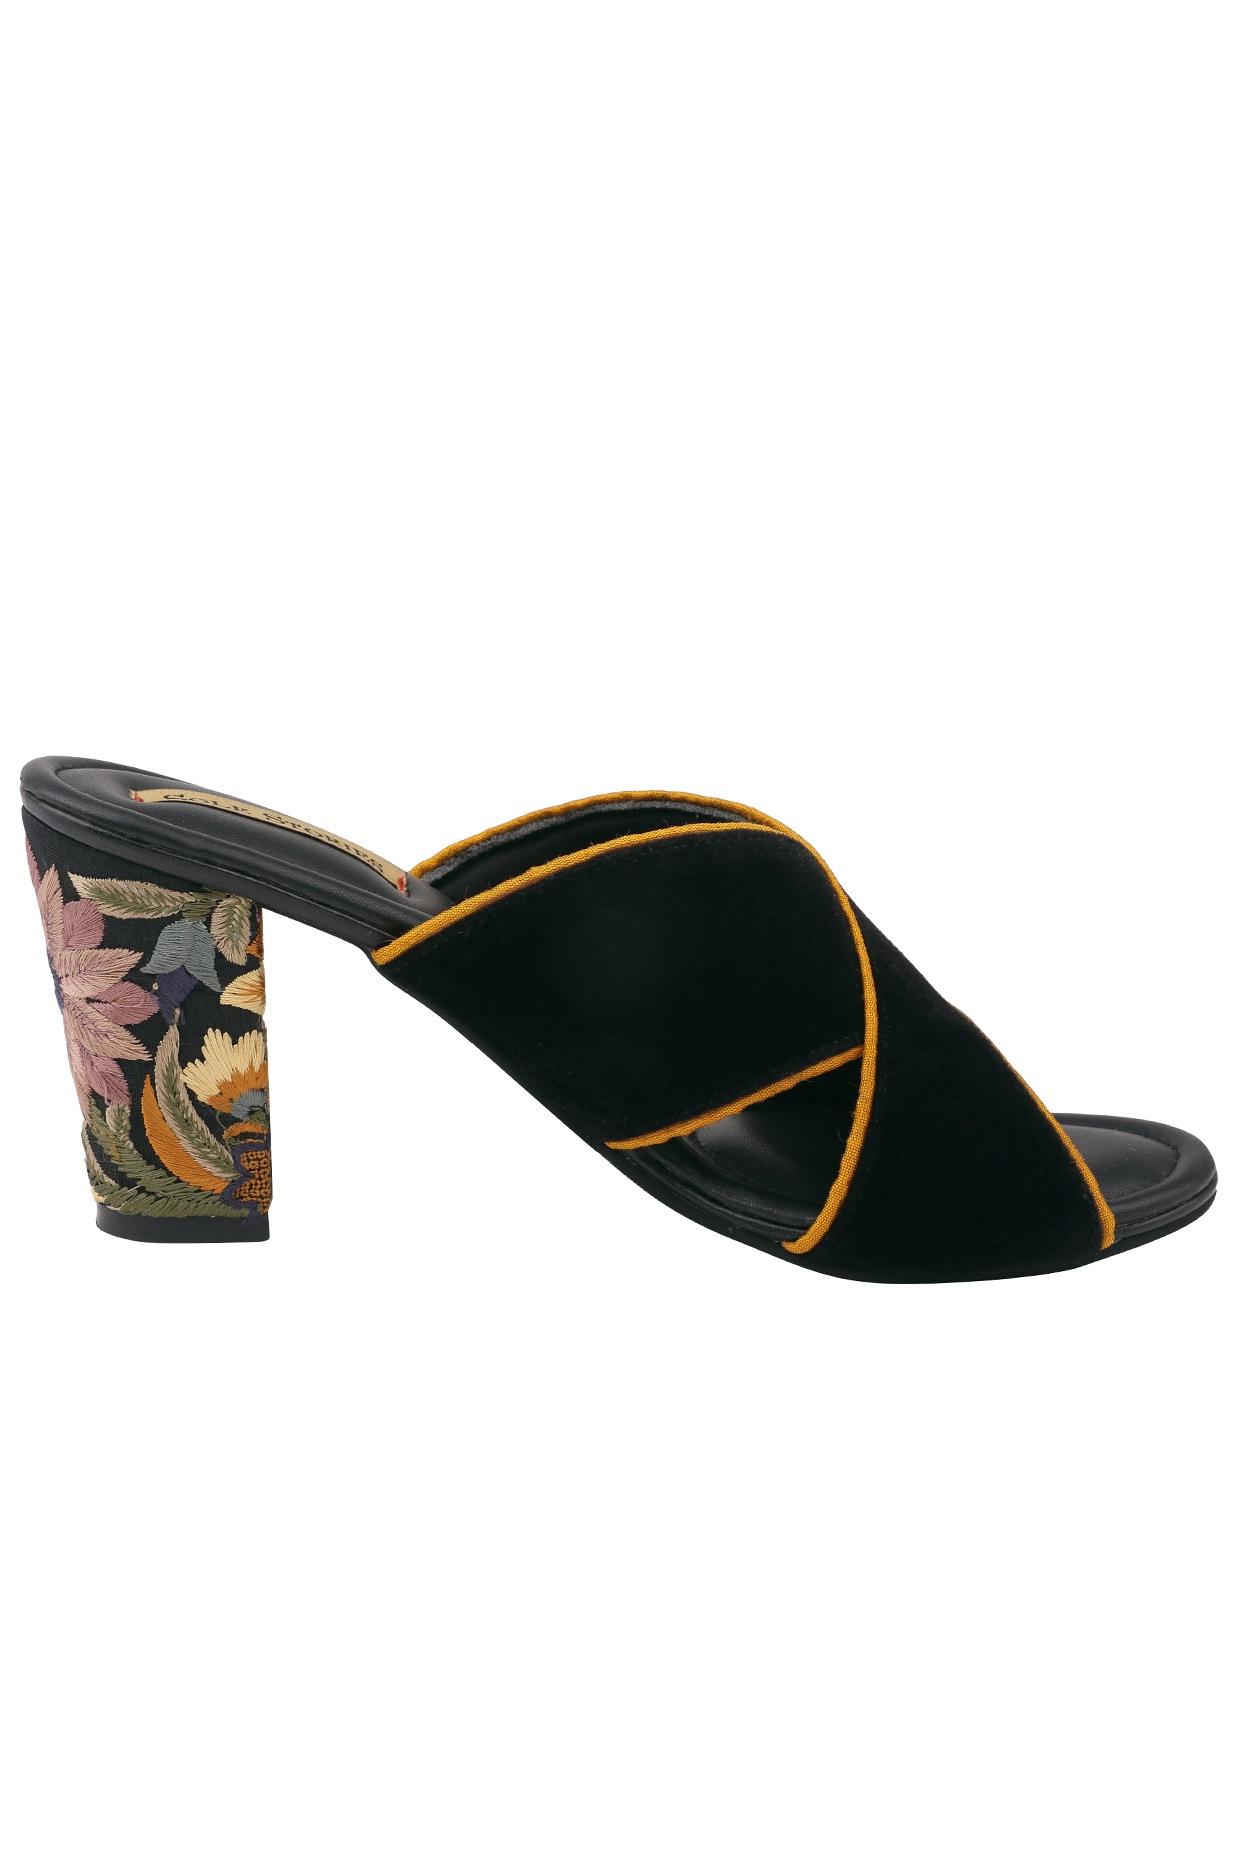 Buy BUMBLEBEE YELLOW STRAPPY ROUND BLOCK HEELS by BOMBAY BROWN at Ogaan  Market Online Shopping Site